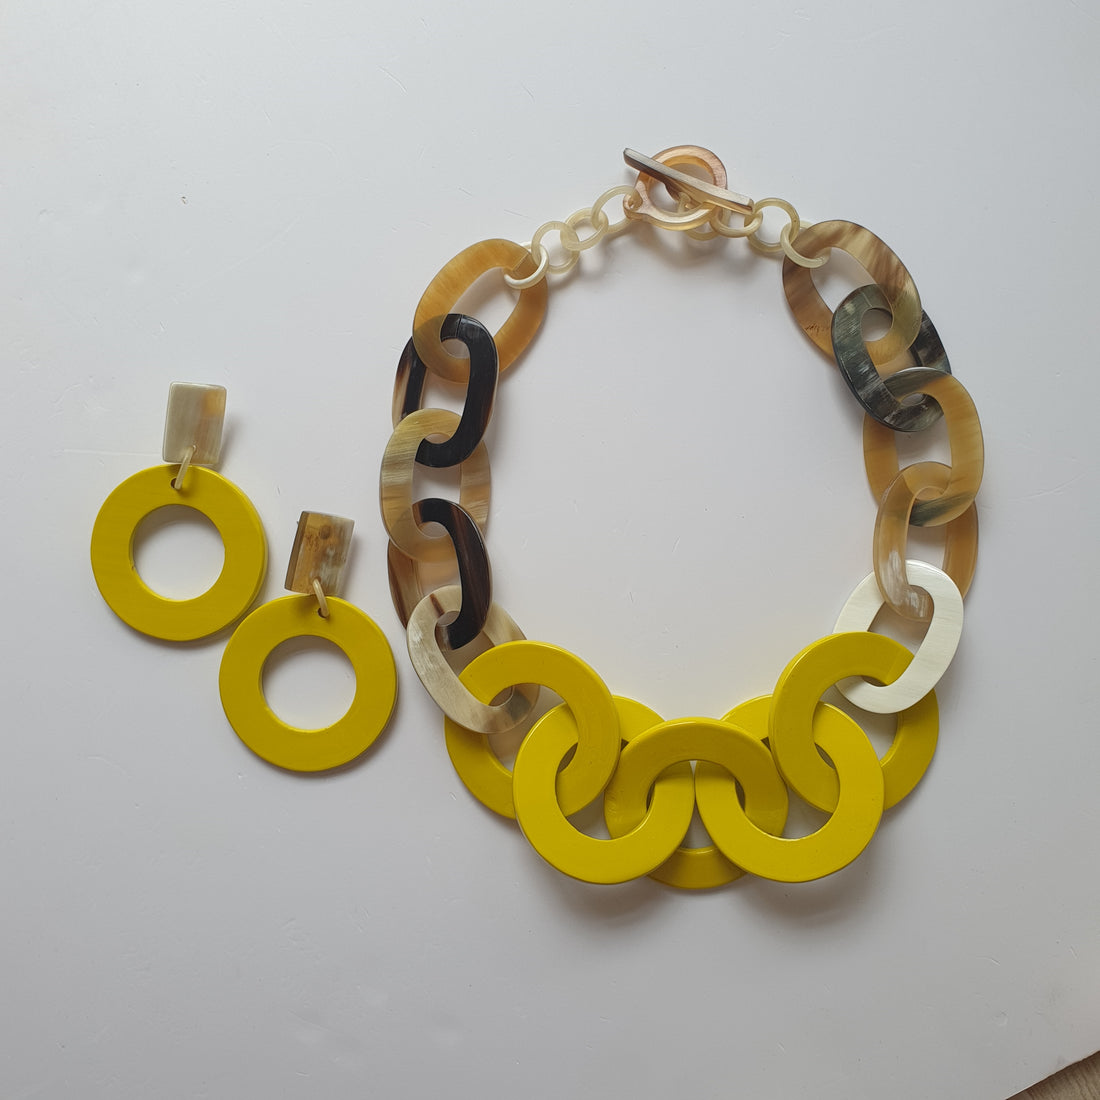 A collection of solid yellow circle earrings and a wide chain necklace on a white background